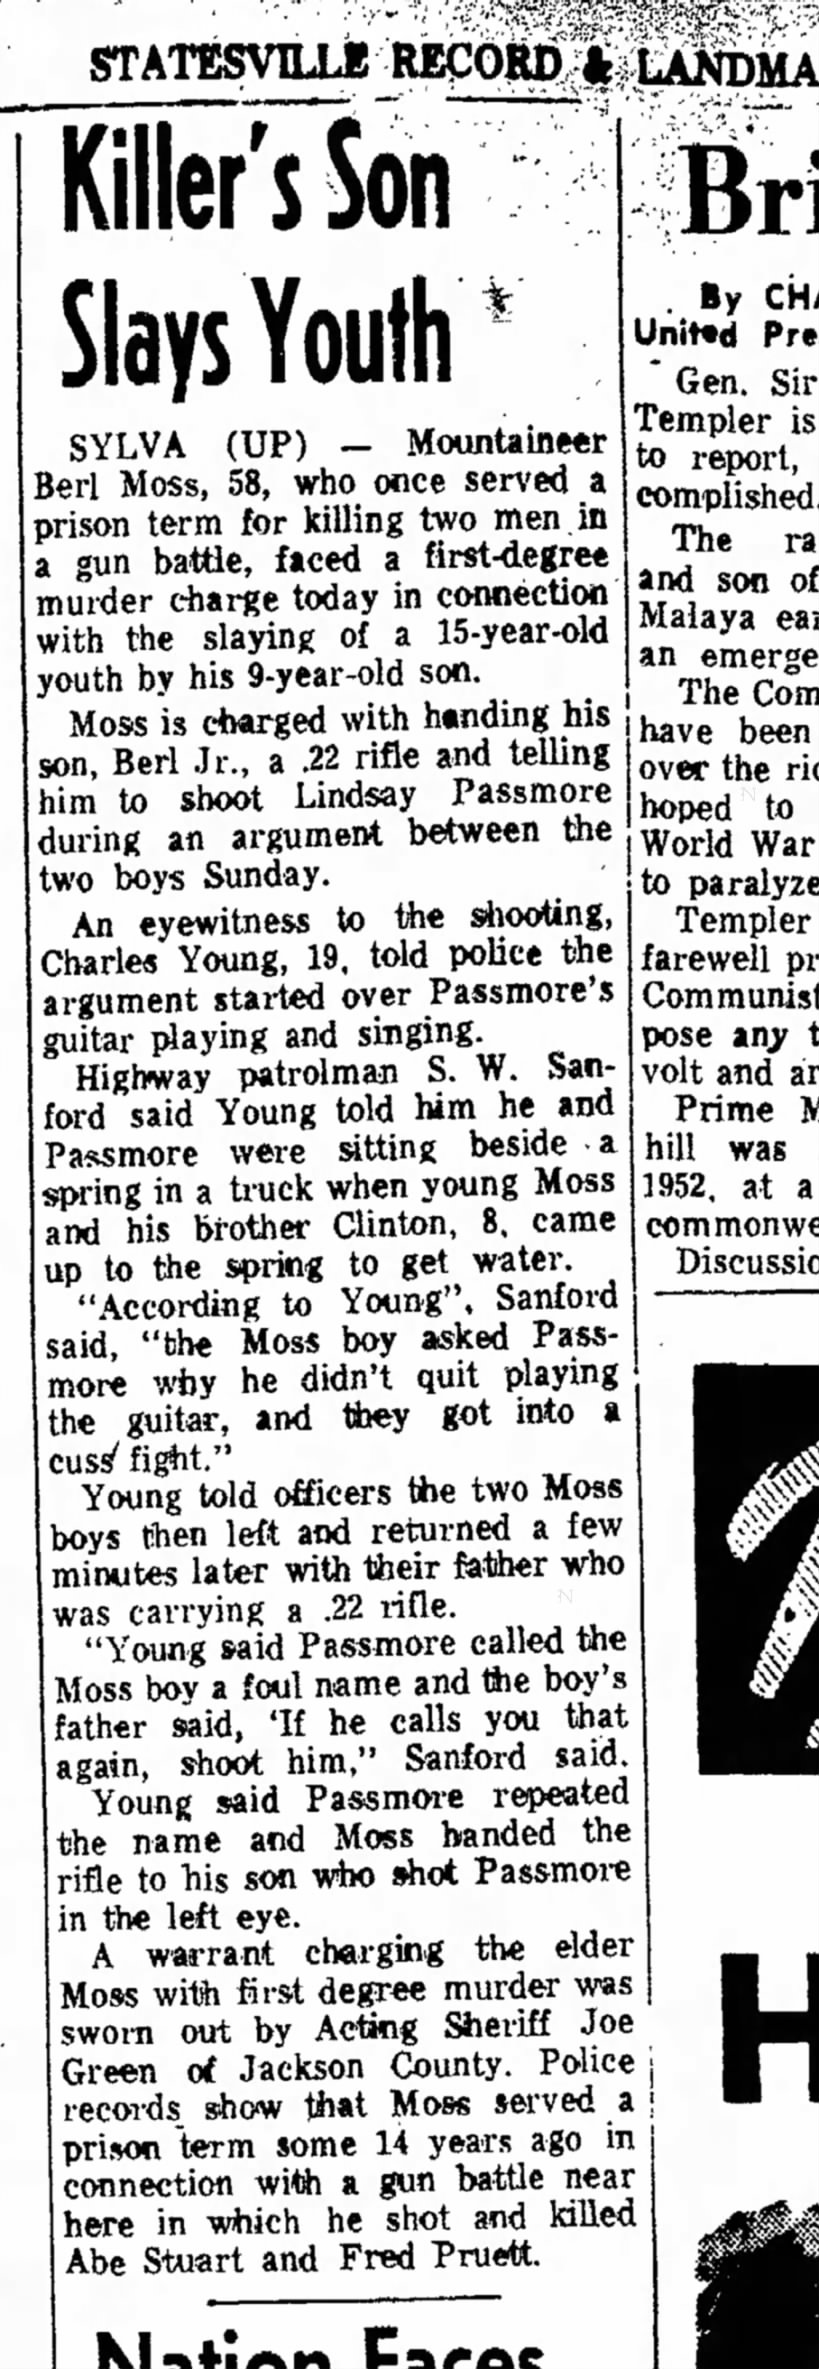 "Killer's Son Slays Youth" Statesville Record & Landmark Wed. 2 June 1954, page 8